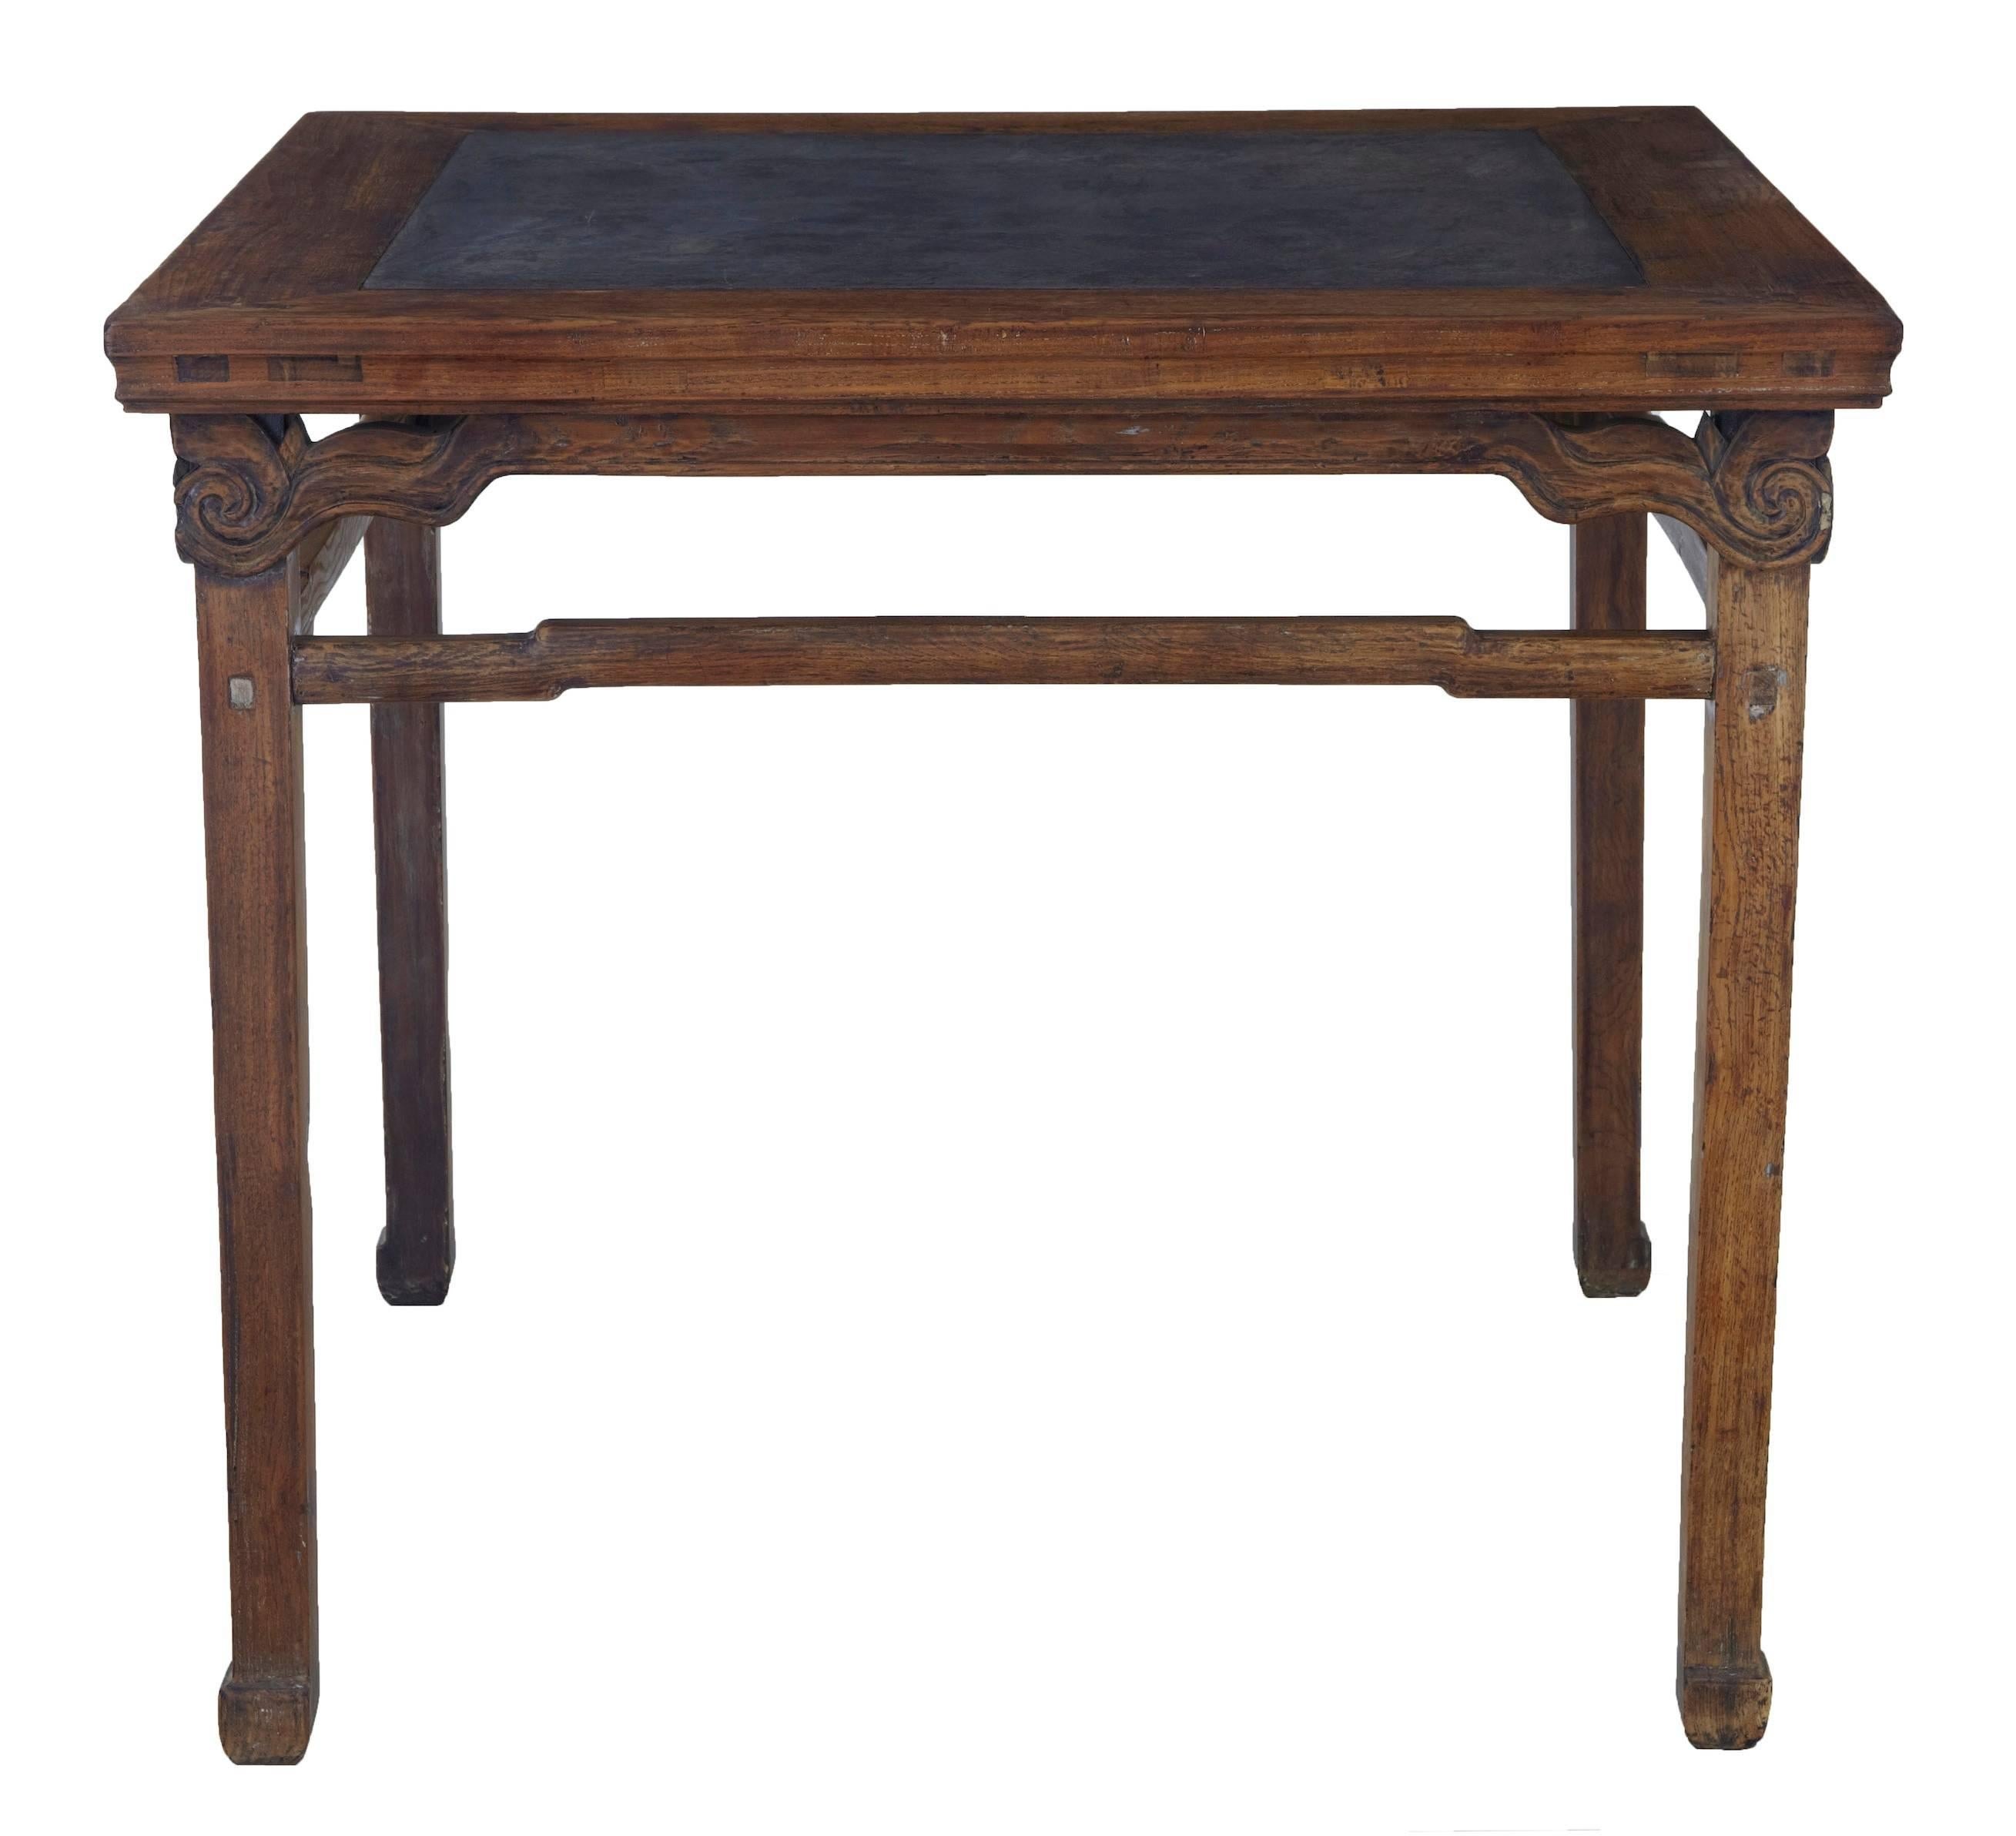 Good quality hardwood Chinese table, circa 1880.
Large grey marble inset top.
Carved dry wood finish.
Minor scratches to marble surface. (photographed).

Measures: Height: 35 1/4